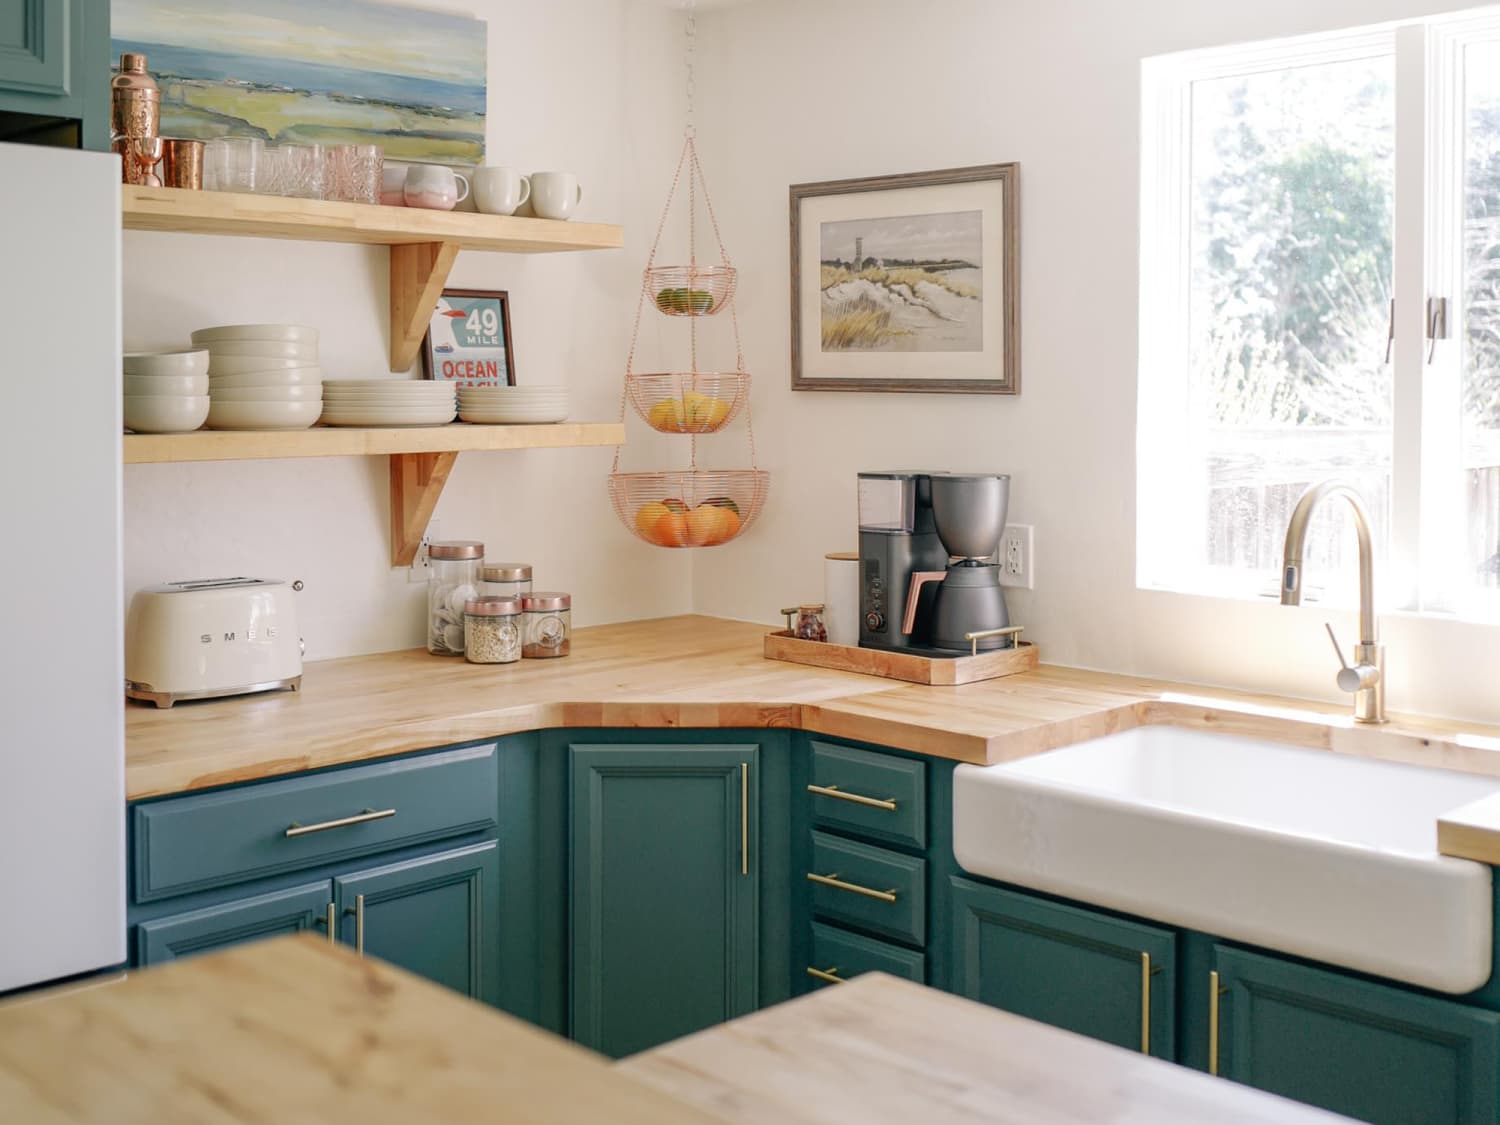 How a Couple Installed Butcher Block Counters on Their Own